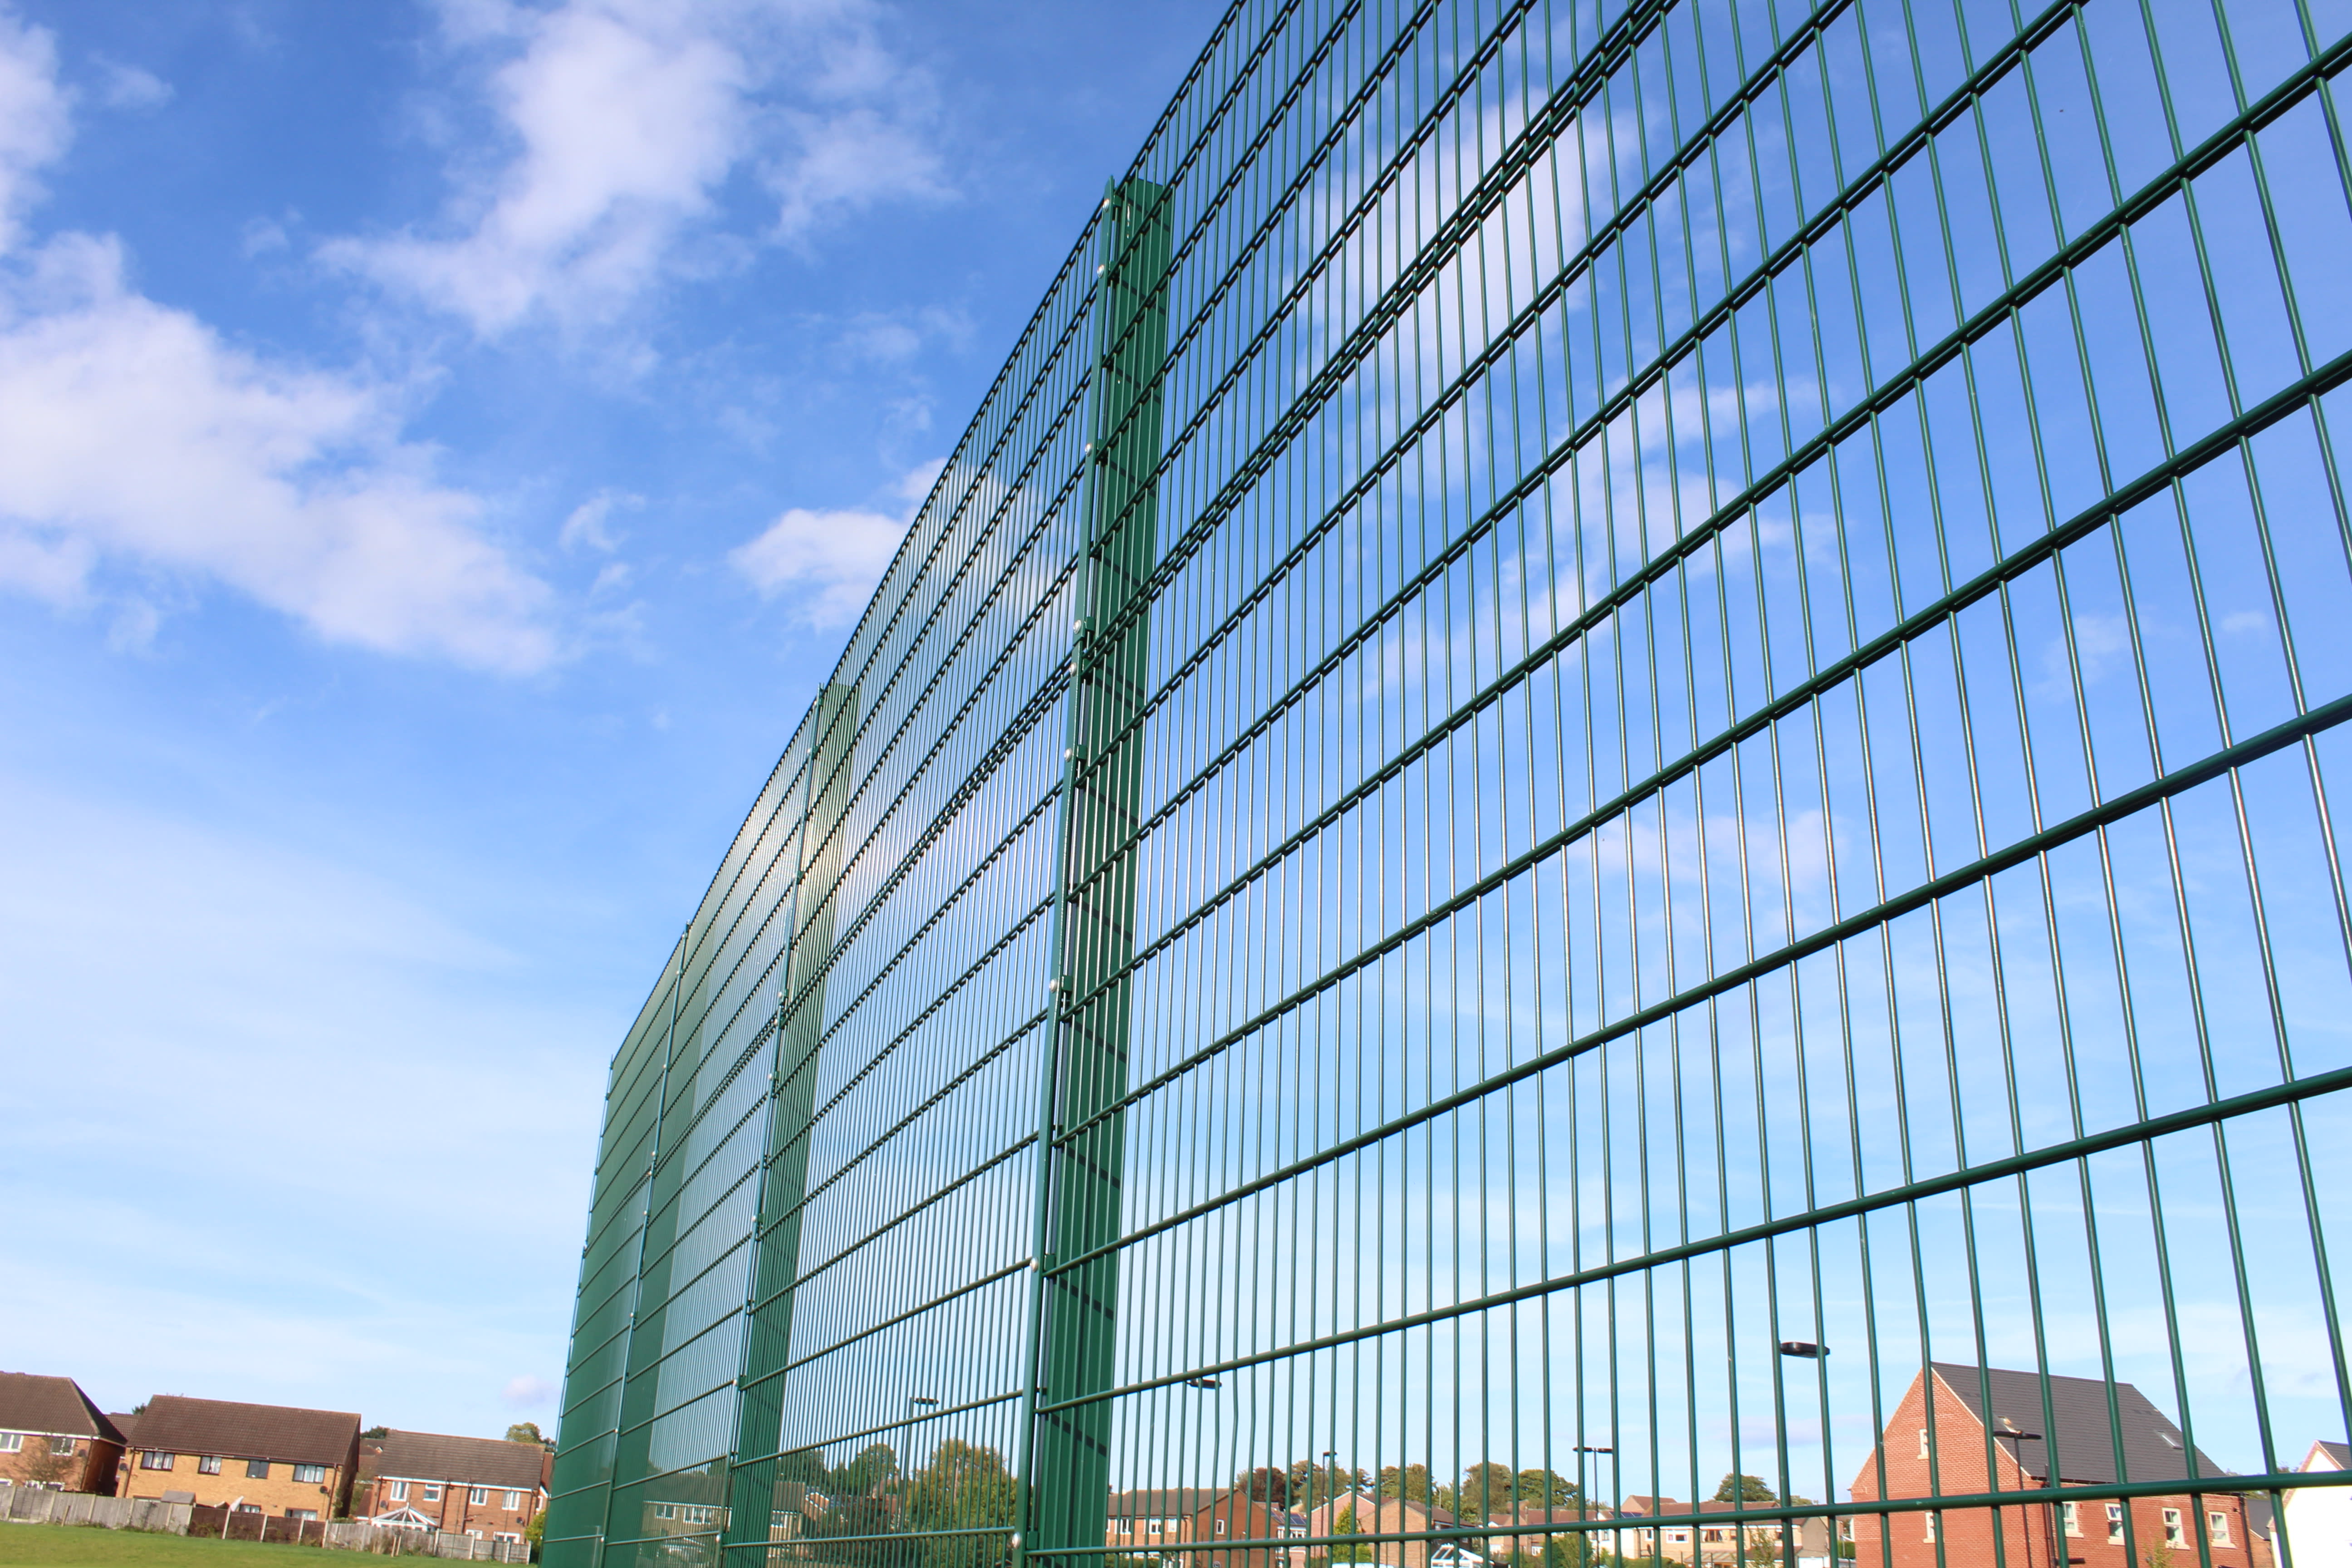 Understanding the Benefits That Mesh Fencing Has to Offer as a Security Perimeter System